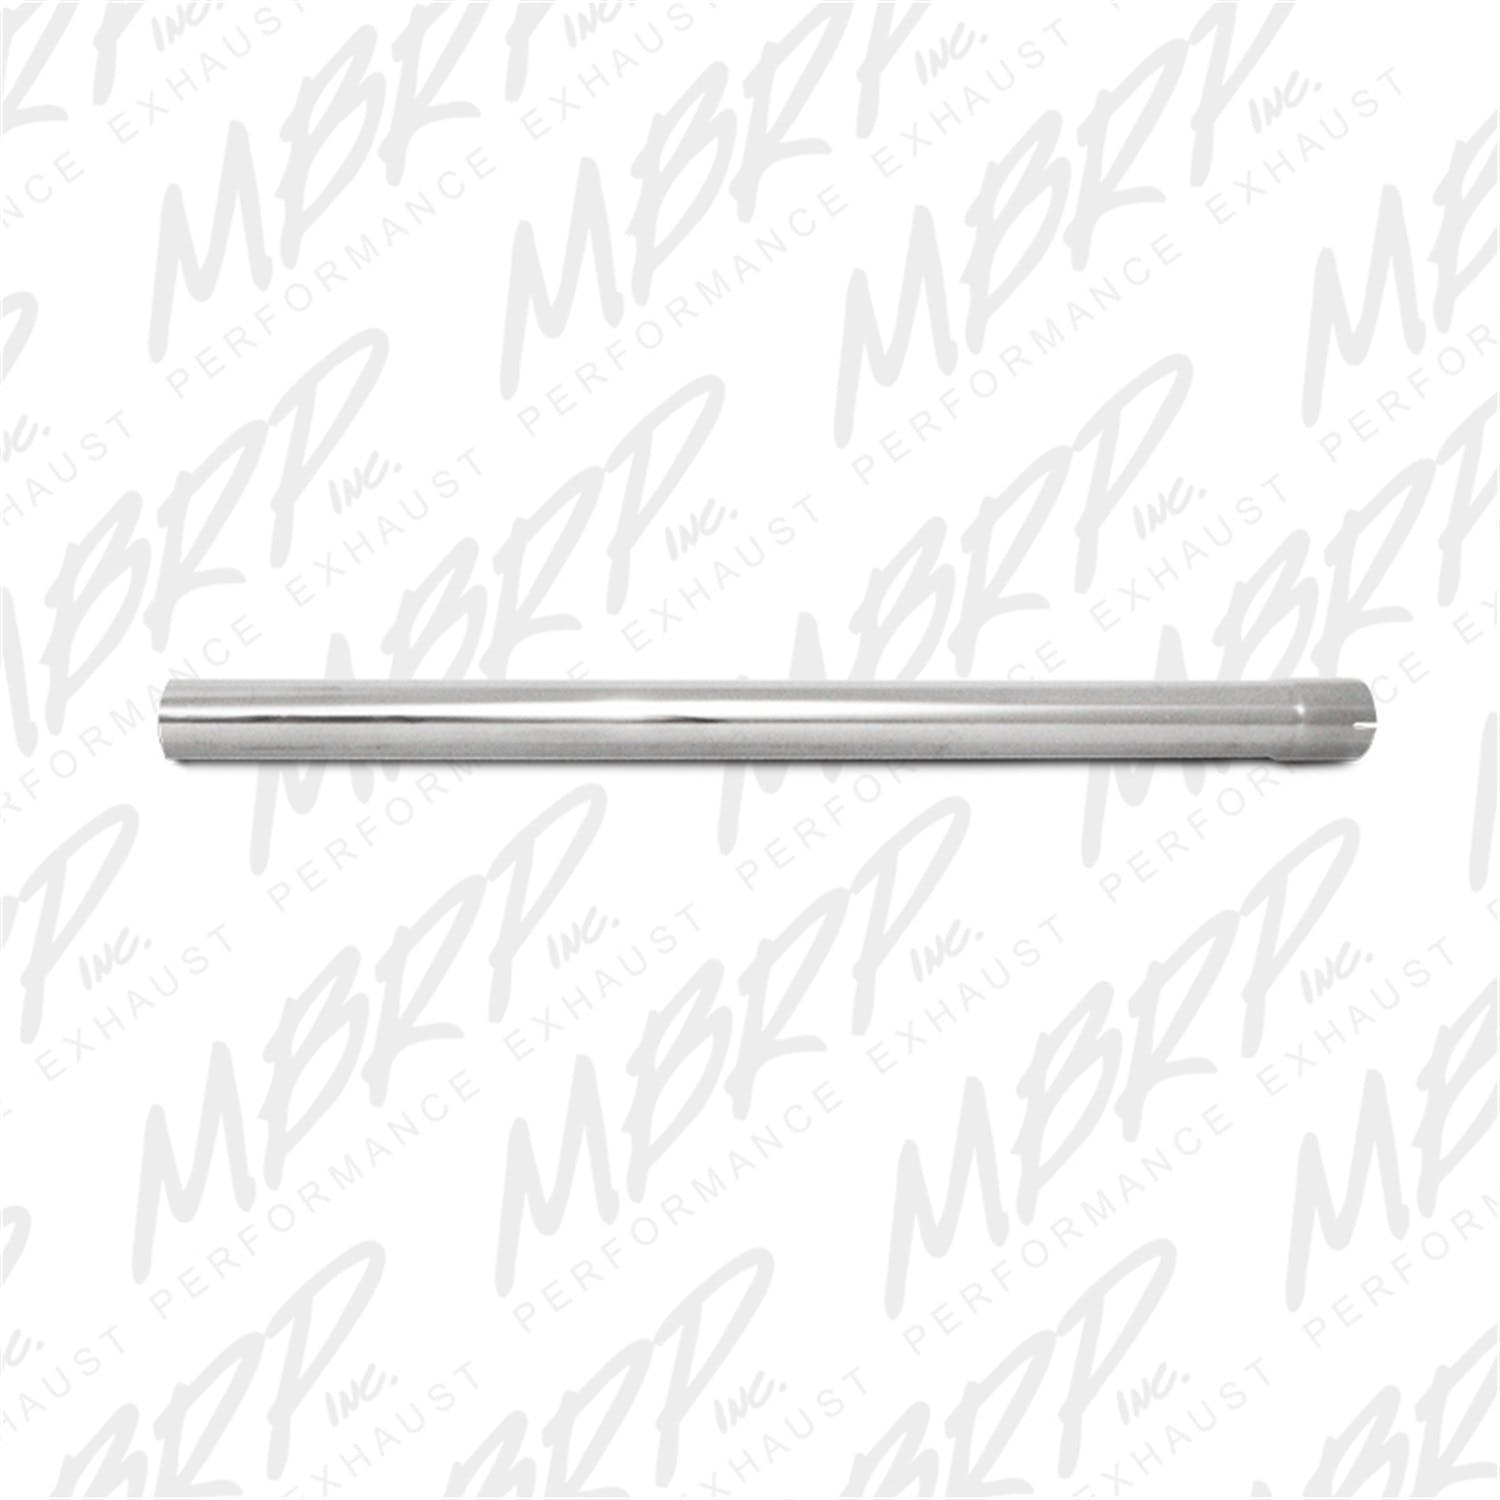 MBRP Exhaust GP5409 5in. Straight Tube; T409-90in. in length